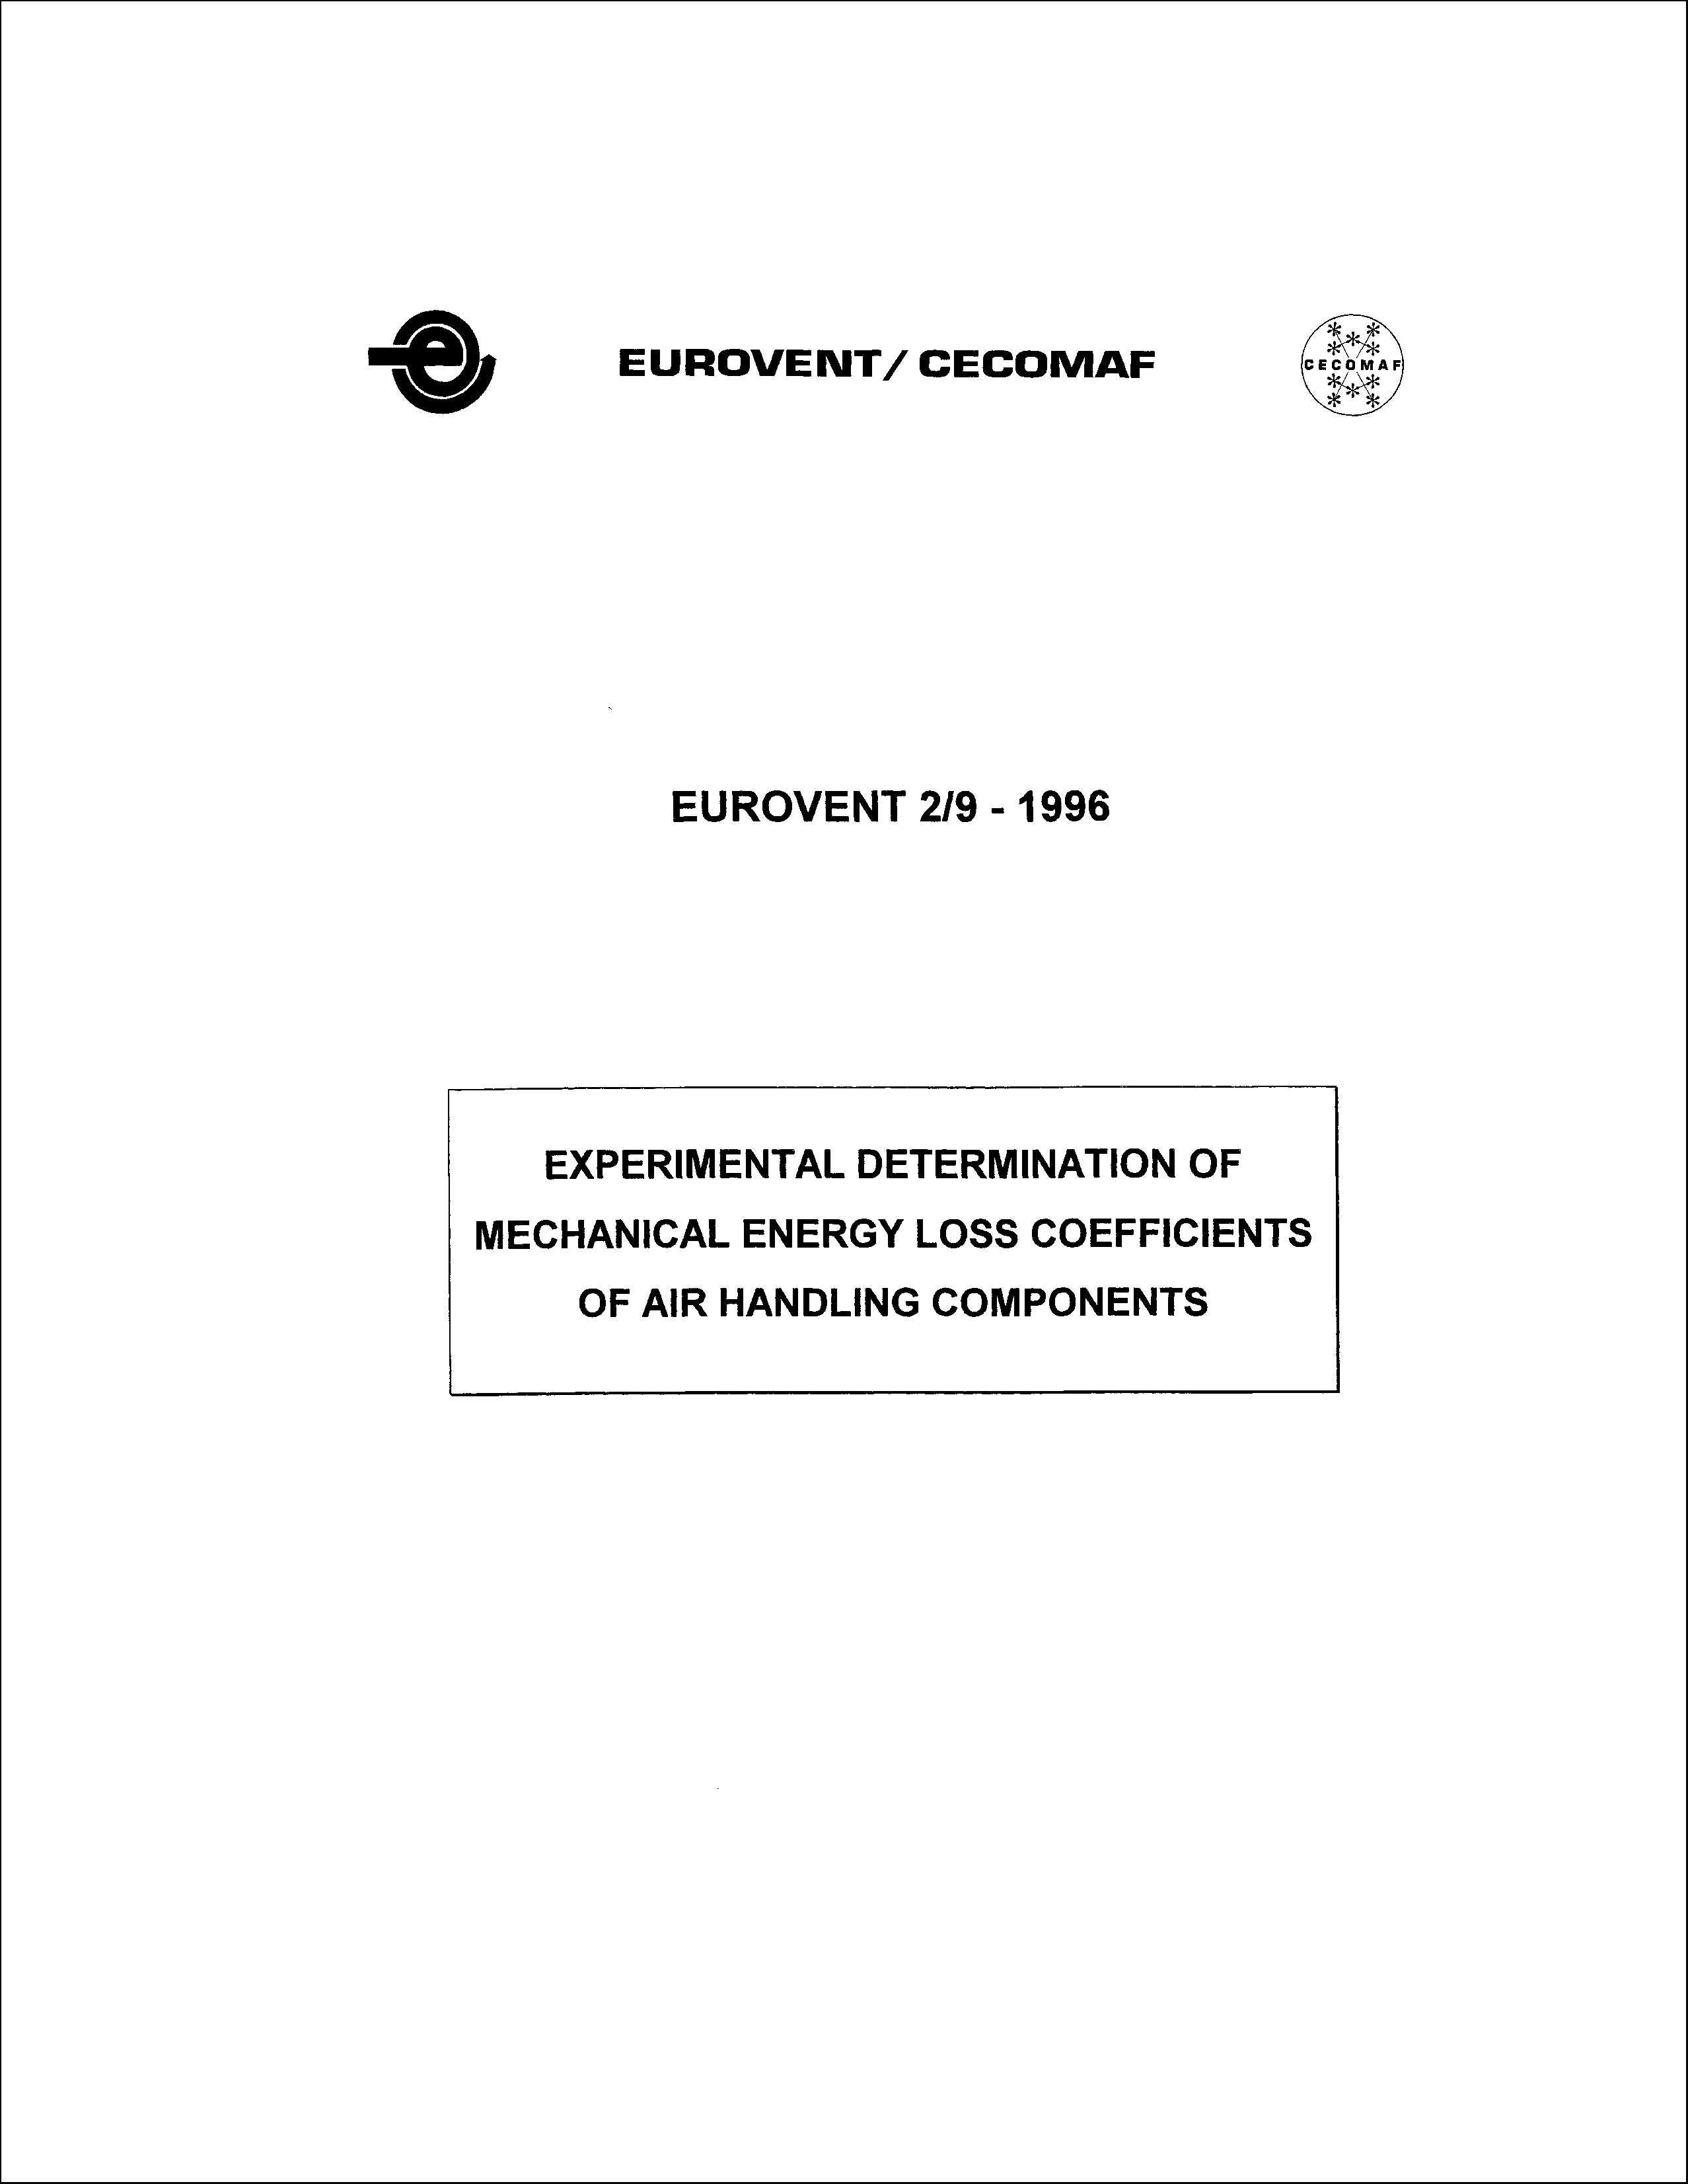 1996 - Experimental determination of mechanical energy loss coefficients of air handling components